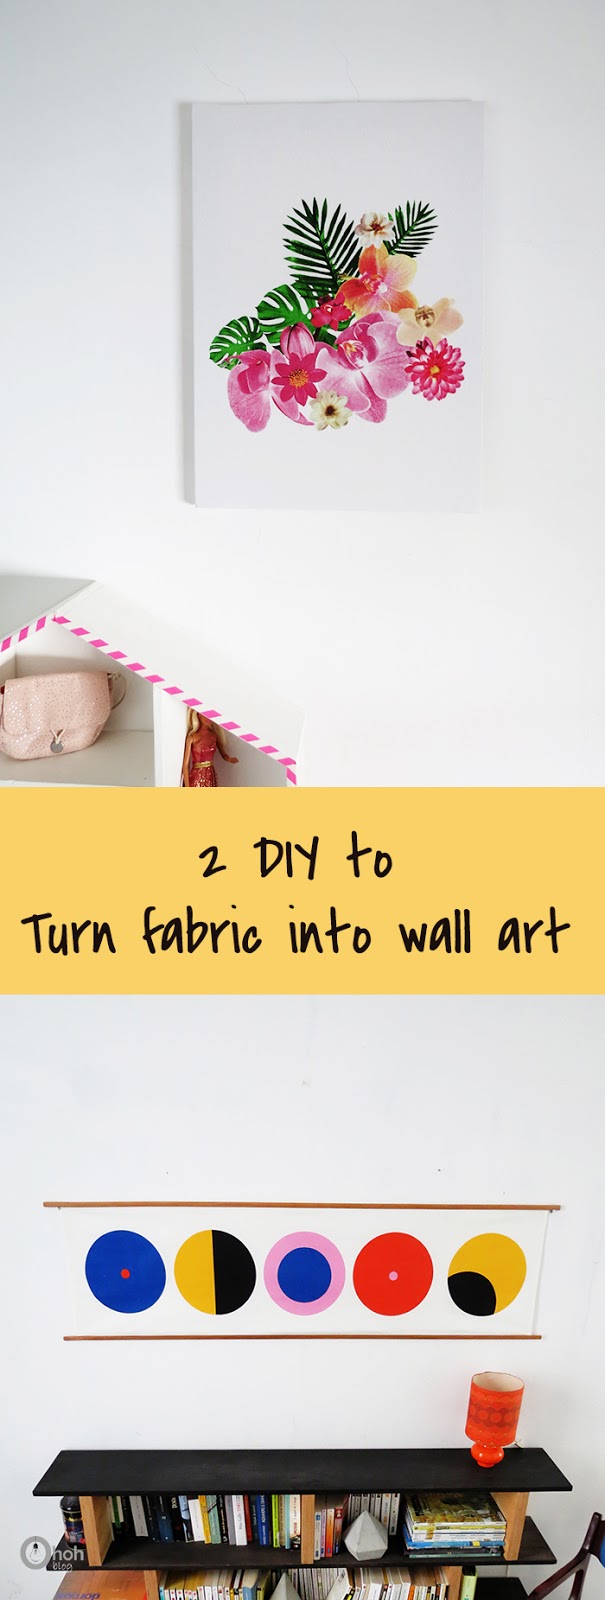 How to use fabric as wall art